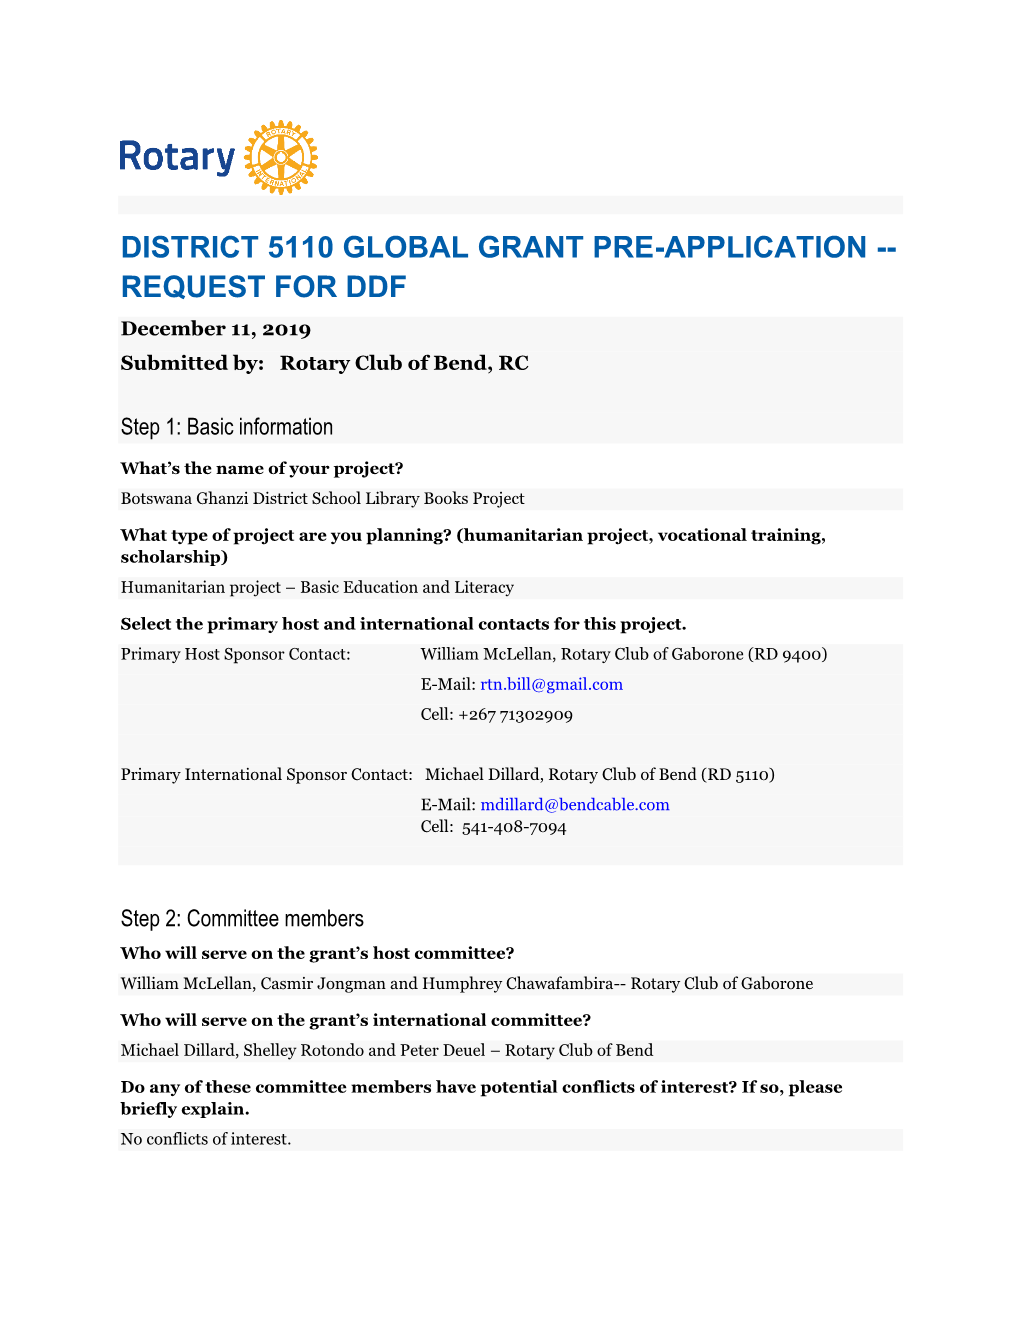 DISTRICT 5110 GLOBAL GRANT PRE-APPLICATION -- REQUEST for DDF December 11, 2019 Submitted By: Rotary Club of Bend, RC